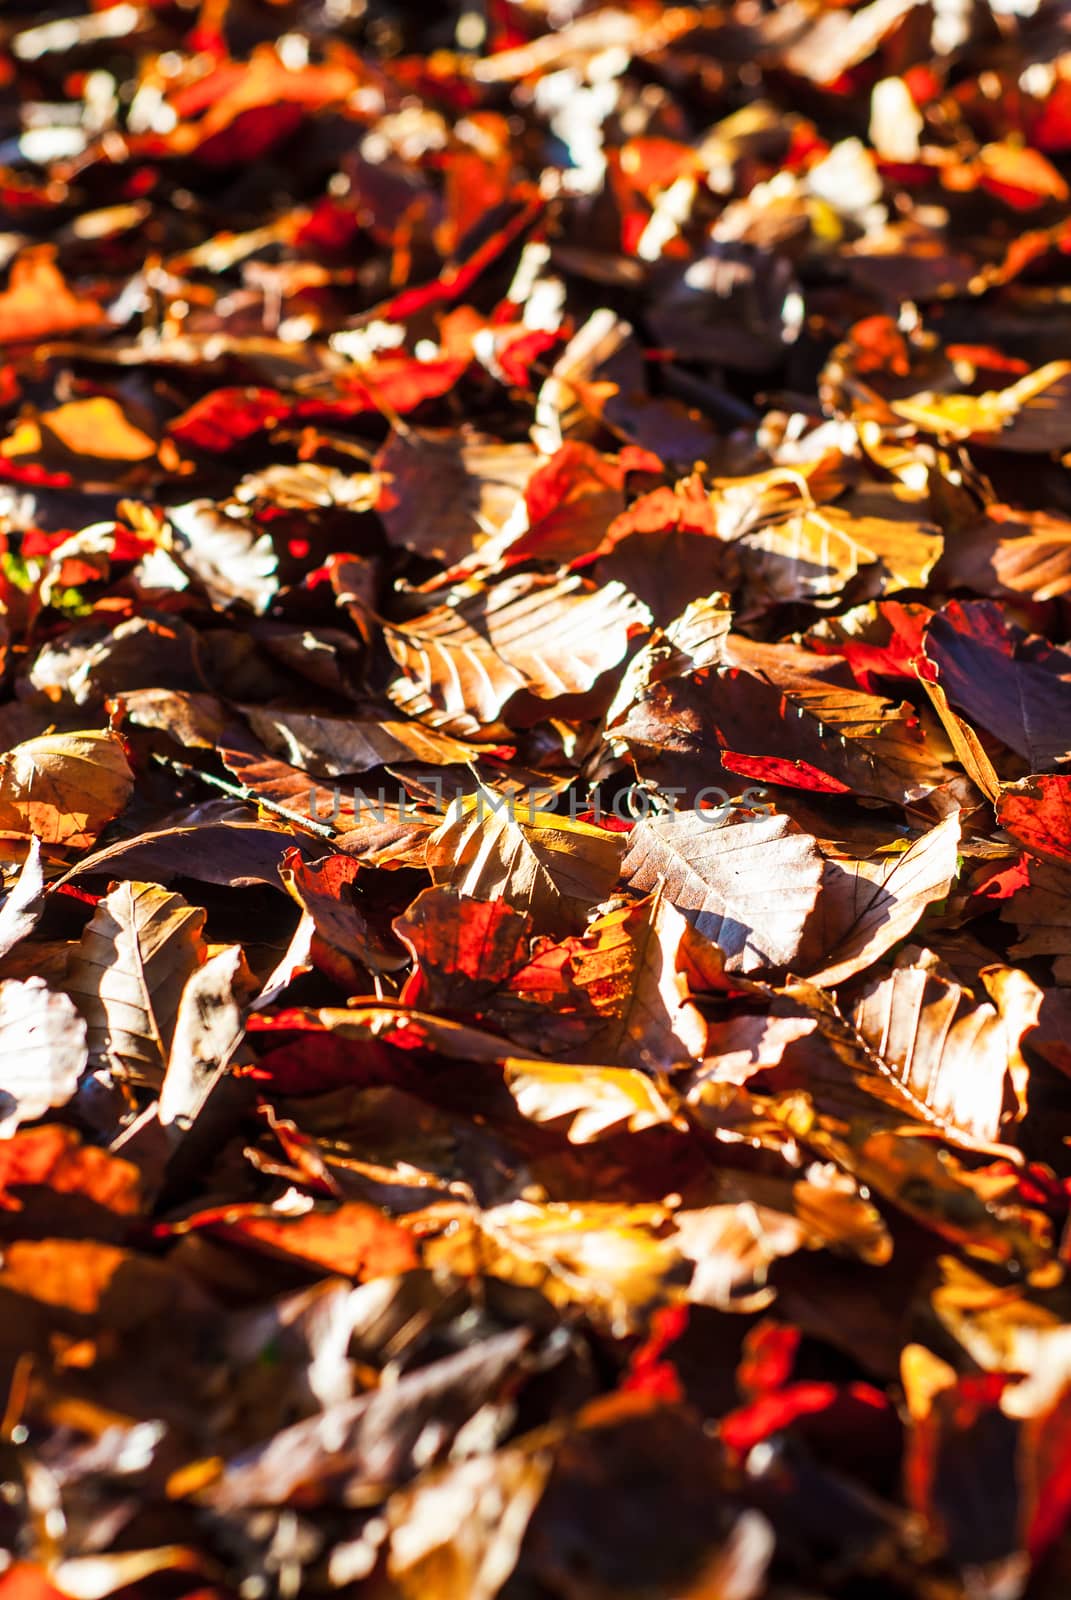 Dry autumn beech leaves lying on the ground in the forest lit by sunlight. Autumn, nature and aging concepts